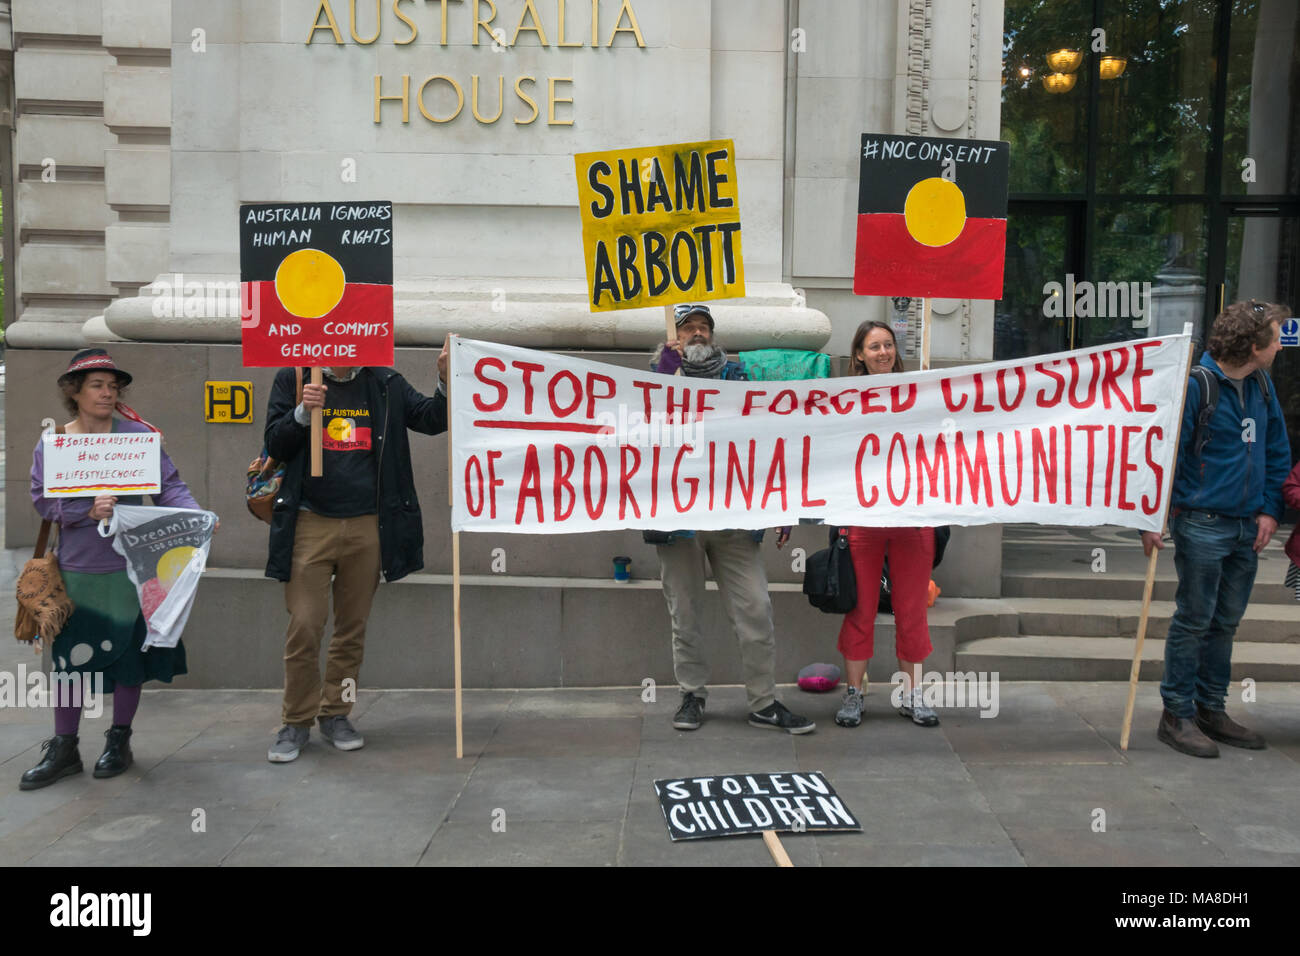 Protesters with banner and placards in front of Australia House, London demanding an end to forced closure of Aborigine Communities. Stock Photo